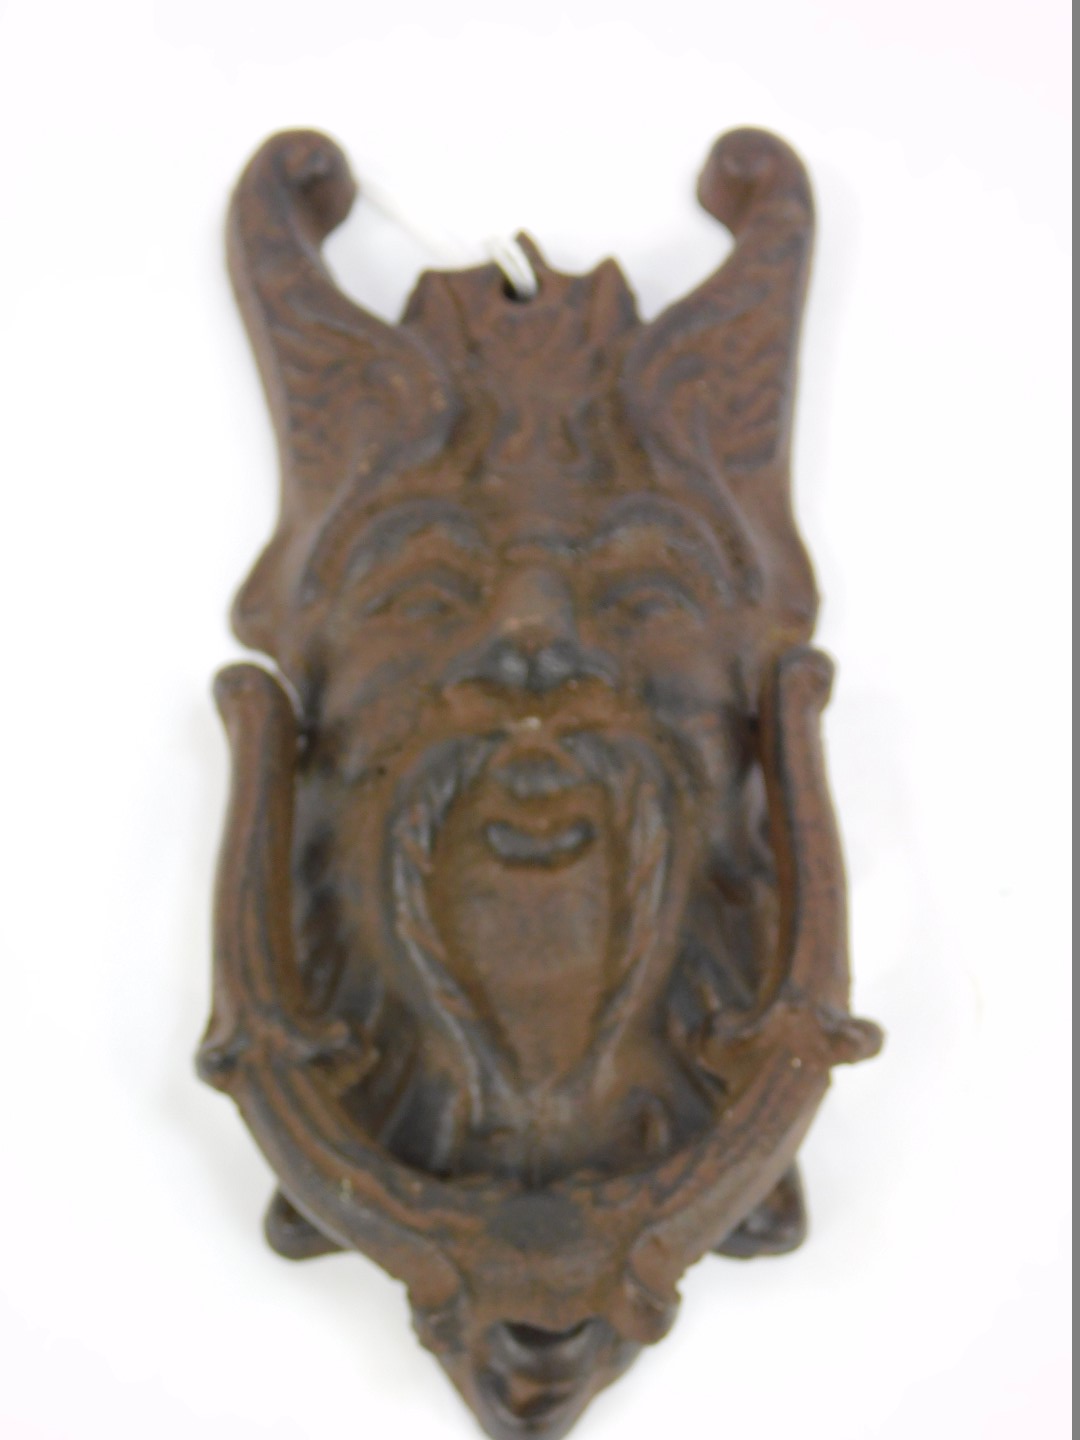 Three reproduction door knockers, comprising a brass door knocker of John Peel, with wheat sheaf top - Image 4 of 4